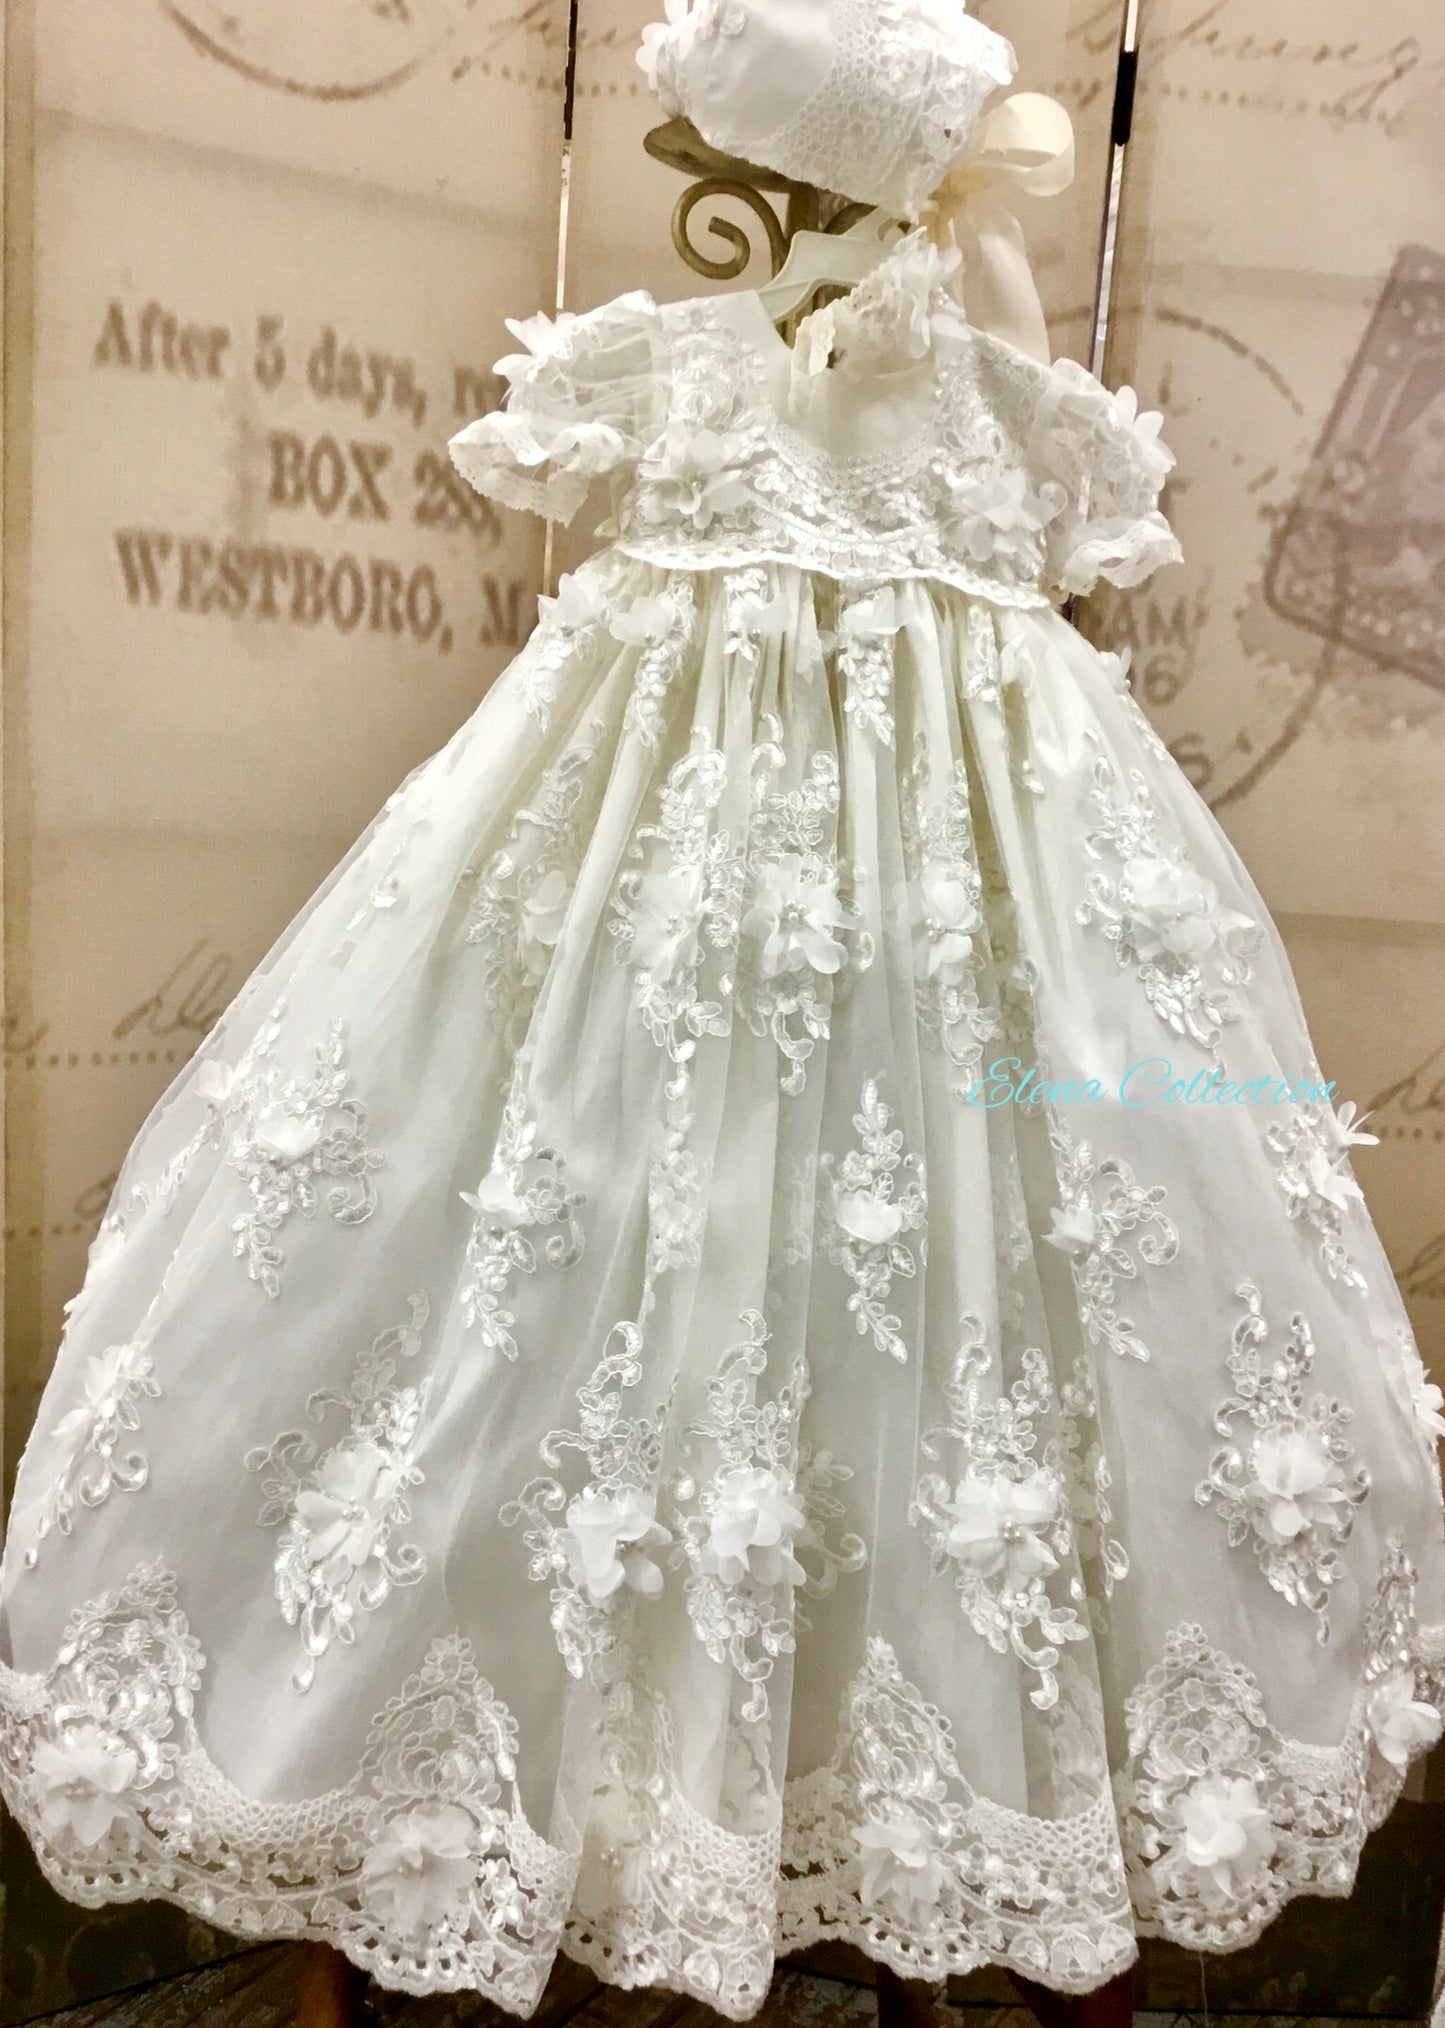 Christening Gown Beaded 3d Lace - Eloisa